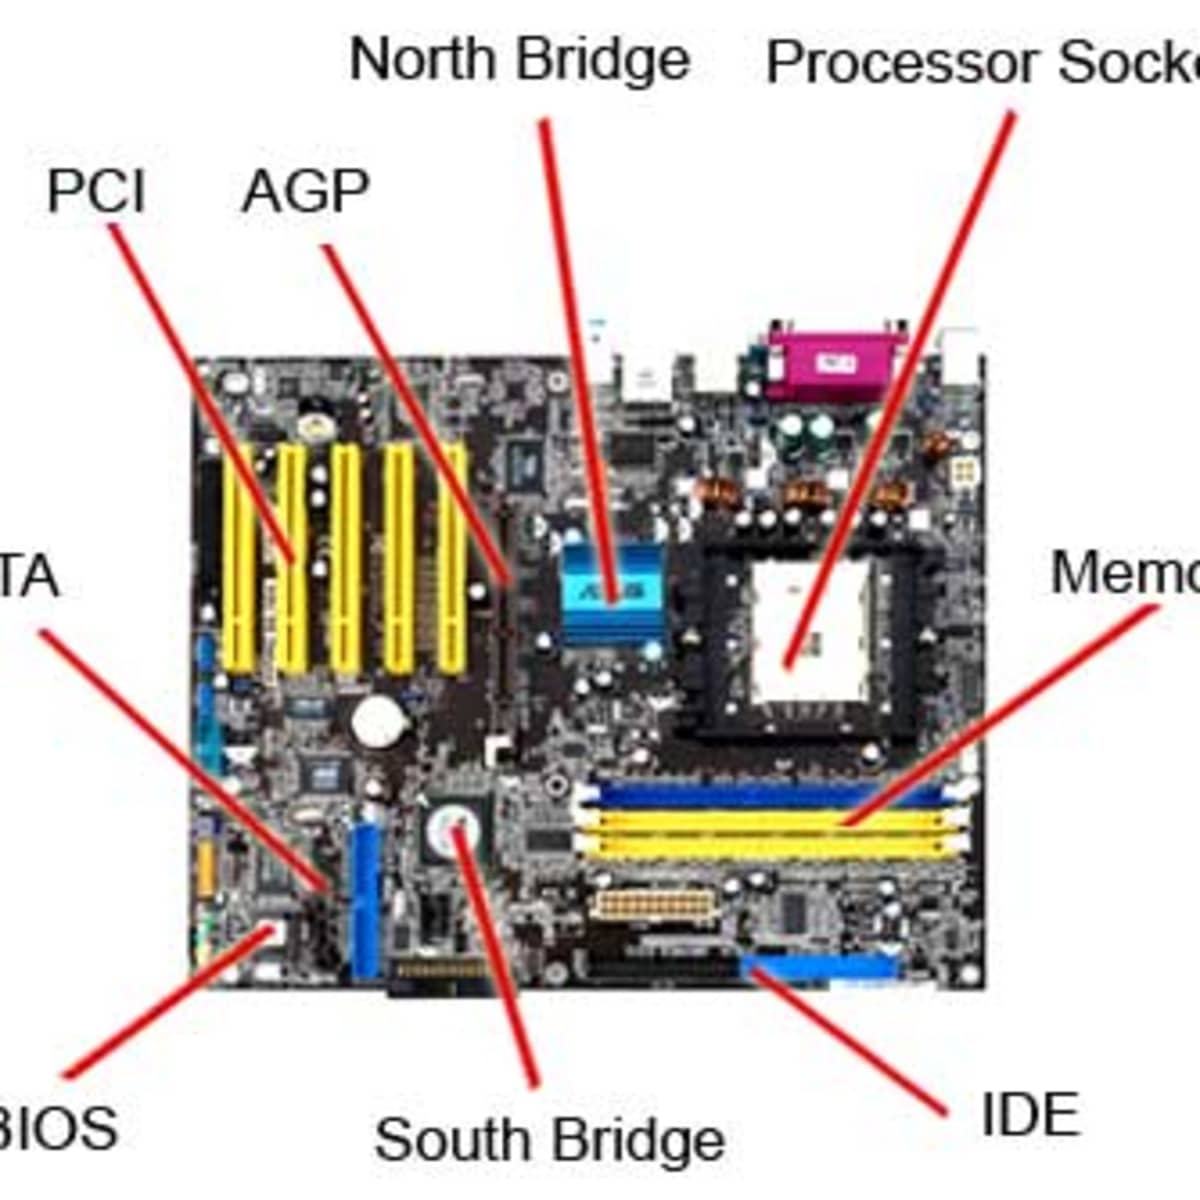 How Do I Know What Type of Motherboard I Have?